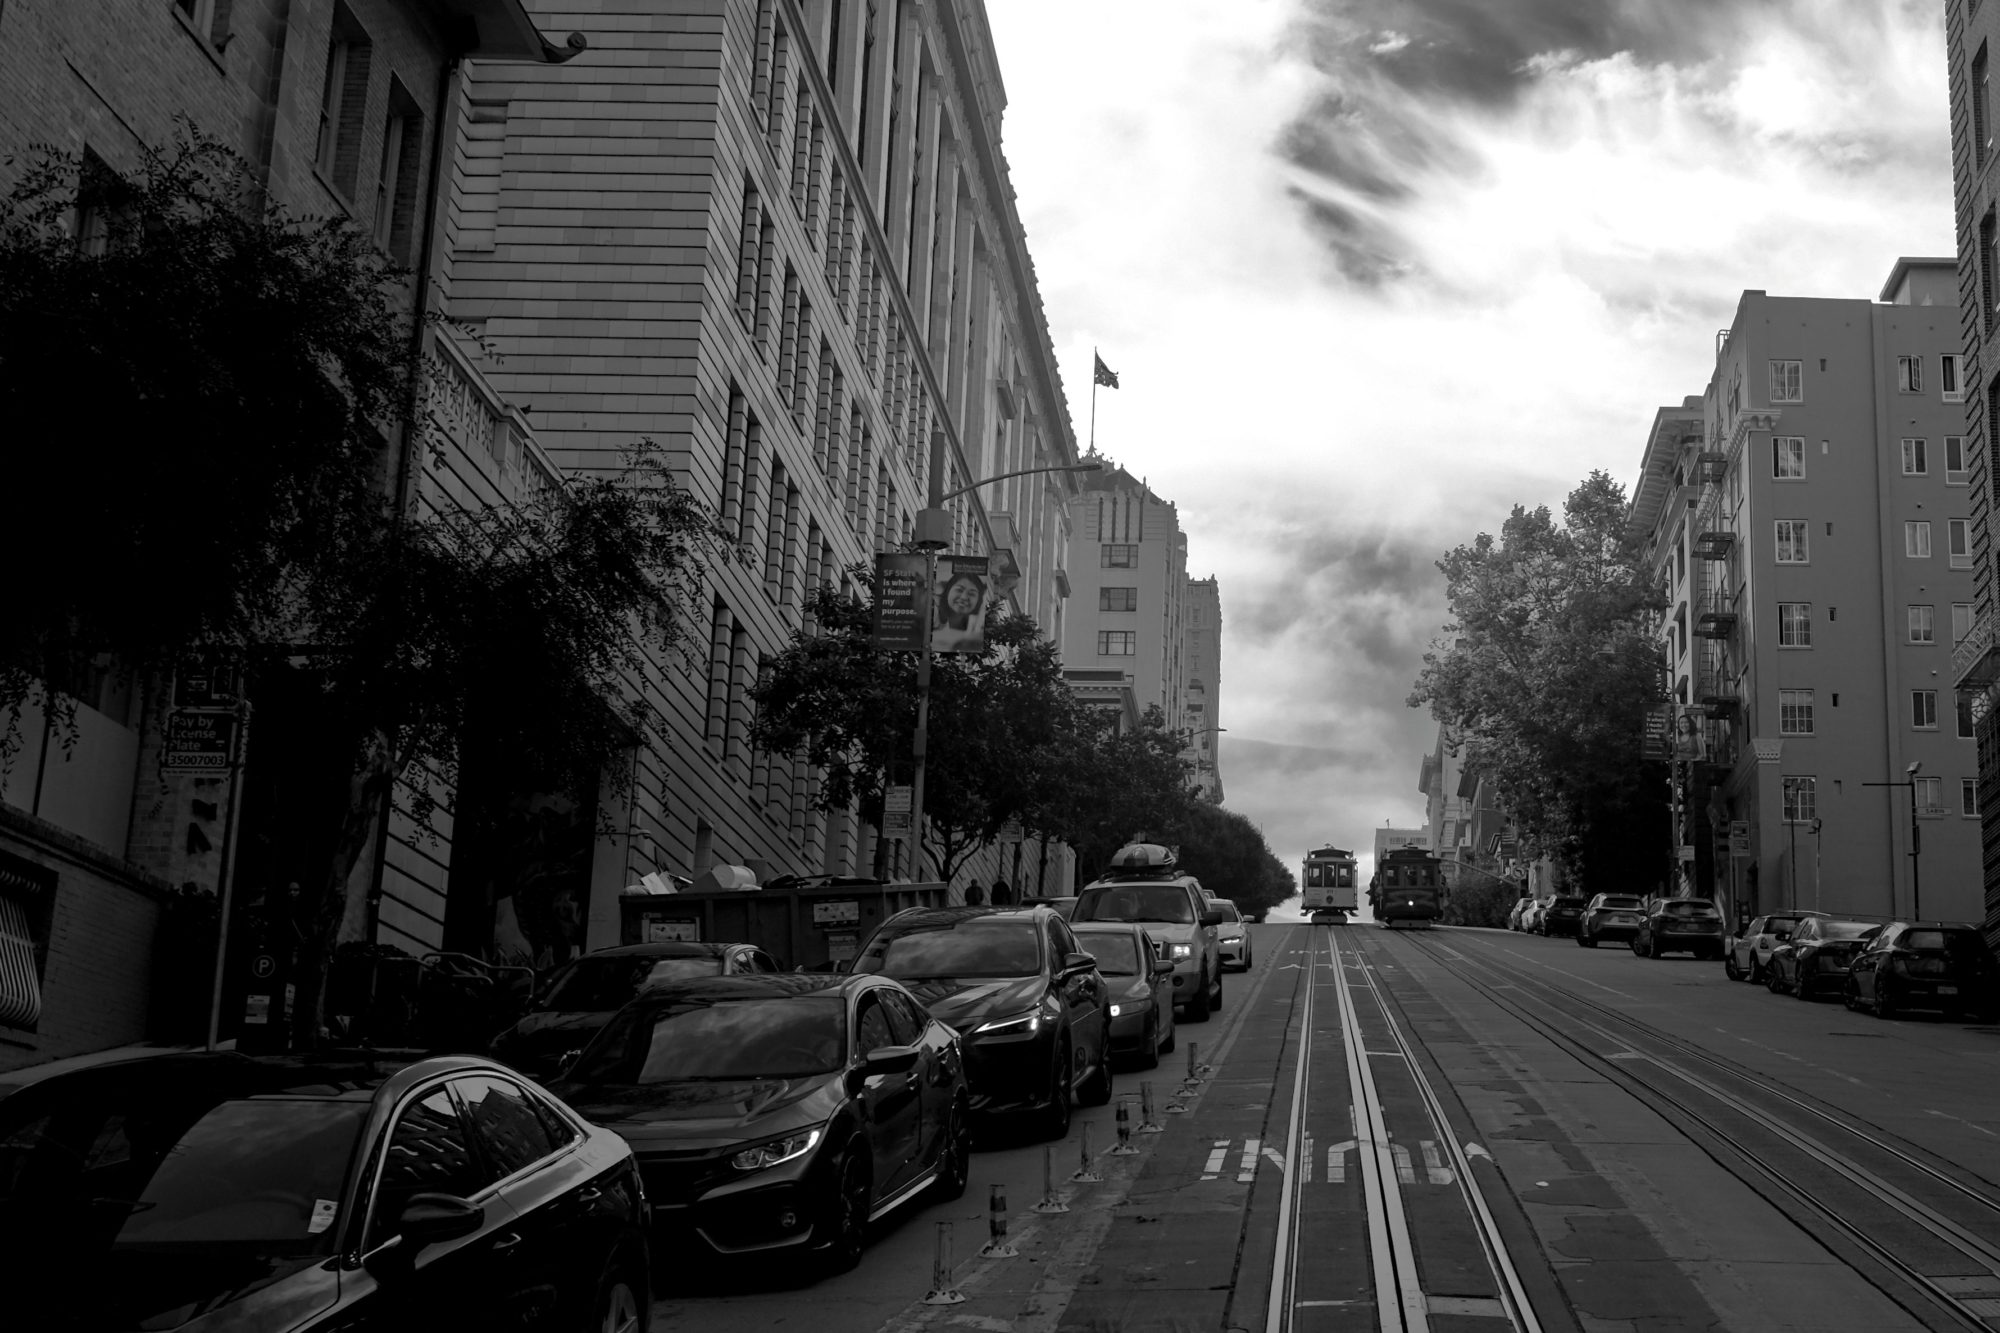 A black and white shot of a trolley in San Francisco